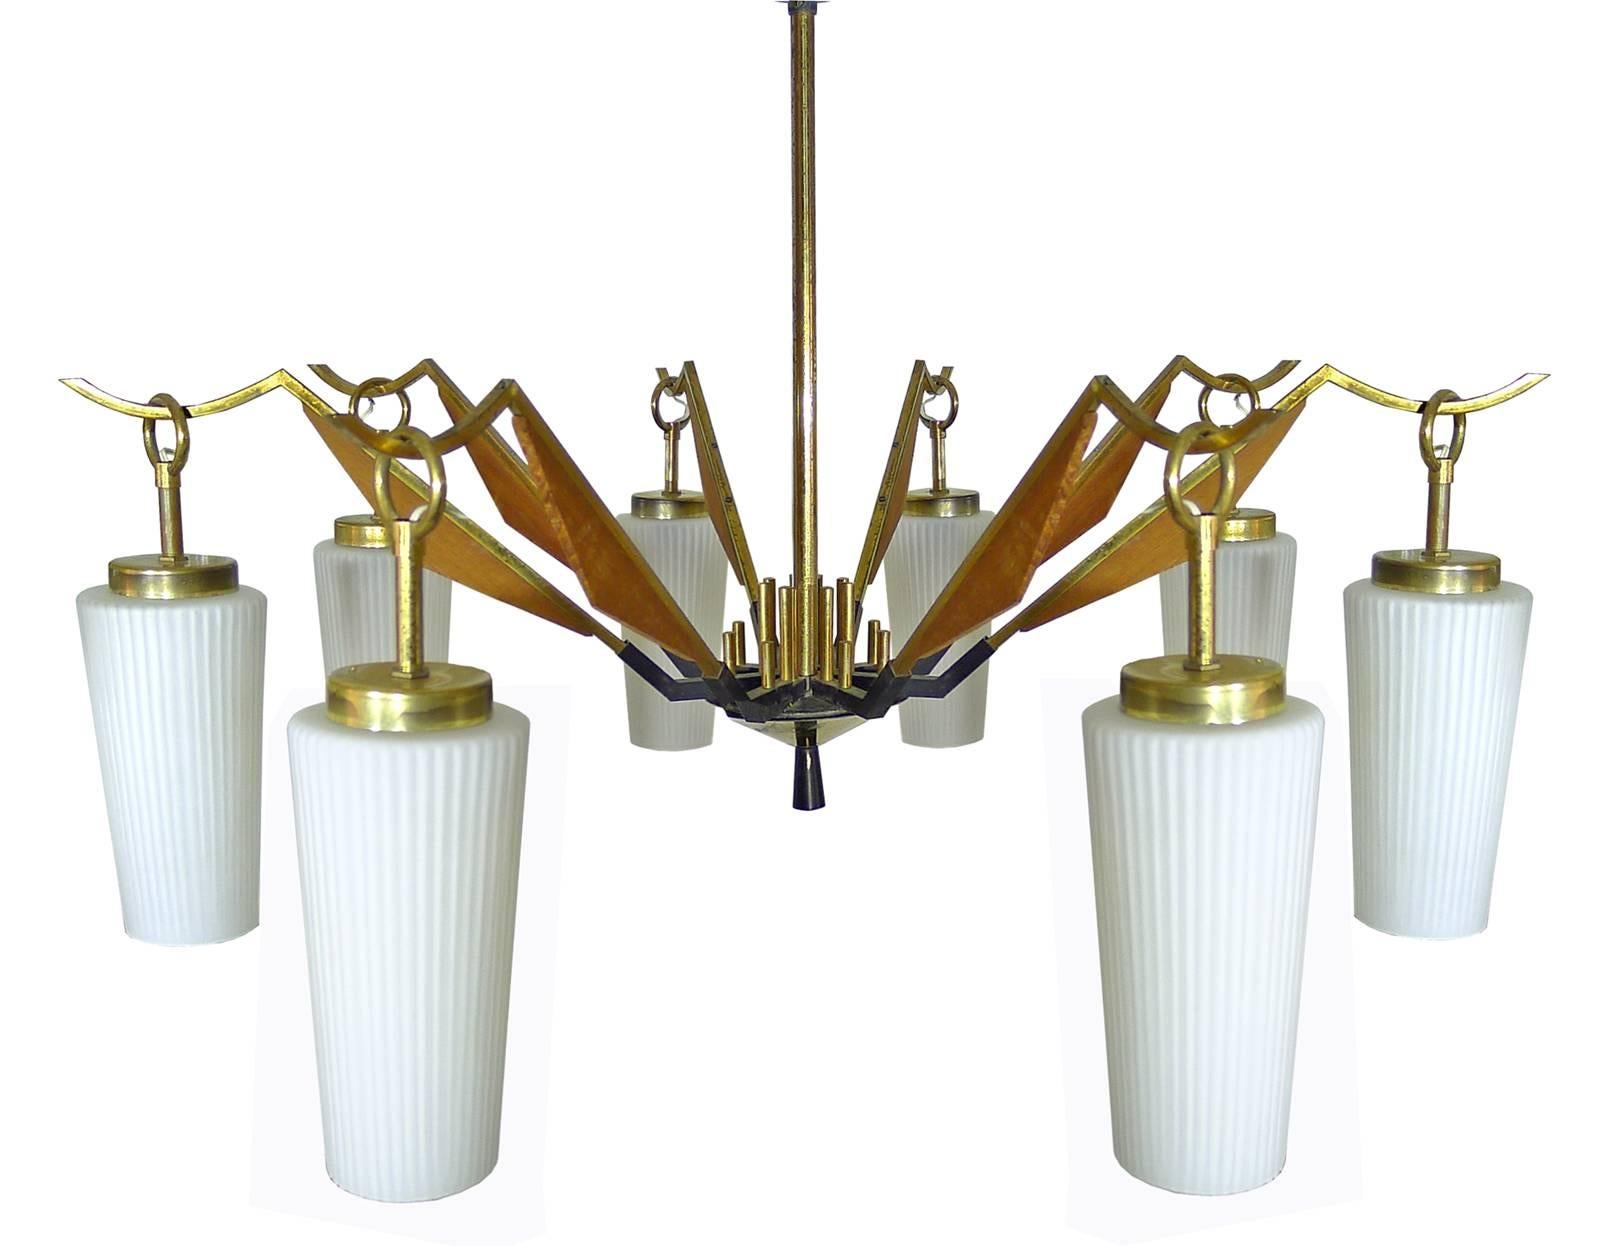 Large Vintage Mid Century Modern Arredoluce or Stilnovo Brass and Teak Wood Spider Chandelier with Eight Hanging Arms Glass Shades in the Danish Style  . Age Patina.
Measures:
Diameter:30 in/ 76 cm
Height: 40 in / 100 cm
Weight 11 lb. (5